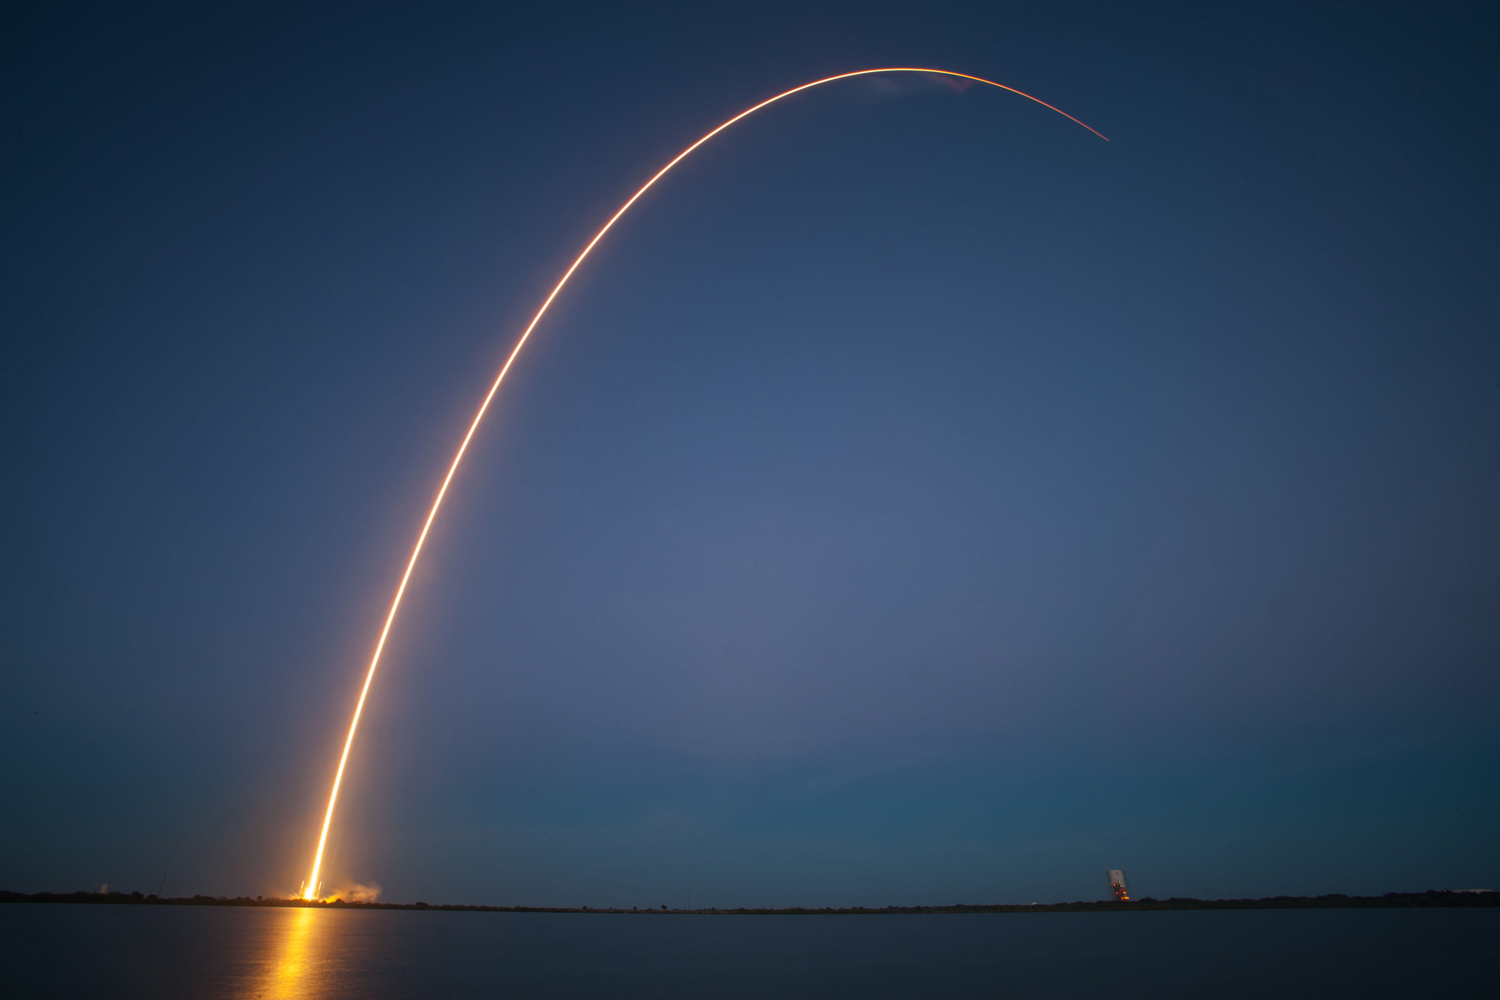 SpaceX's Falcon 9 and SES 8 launch from SpaceX's launch pad at Cape Canaveral, Fla., on Nov. 28, 2013.